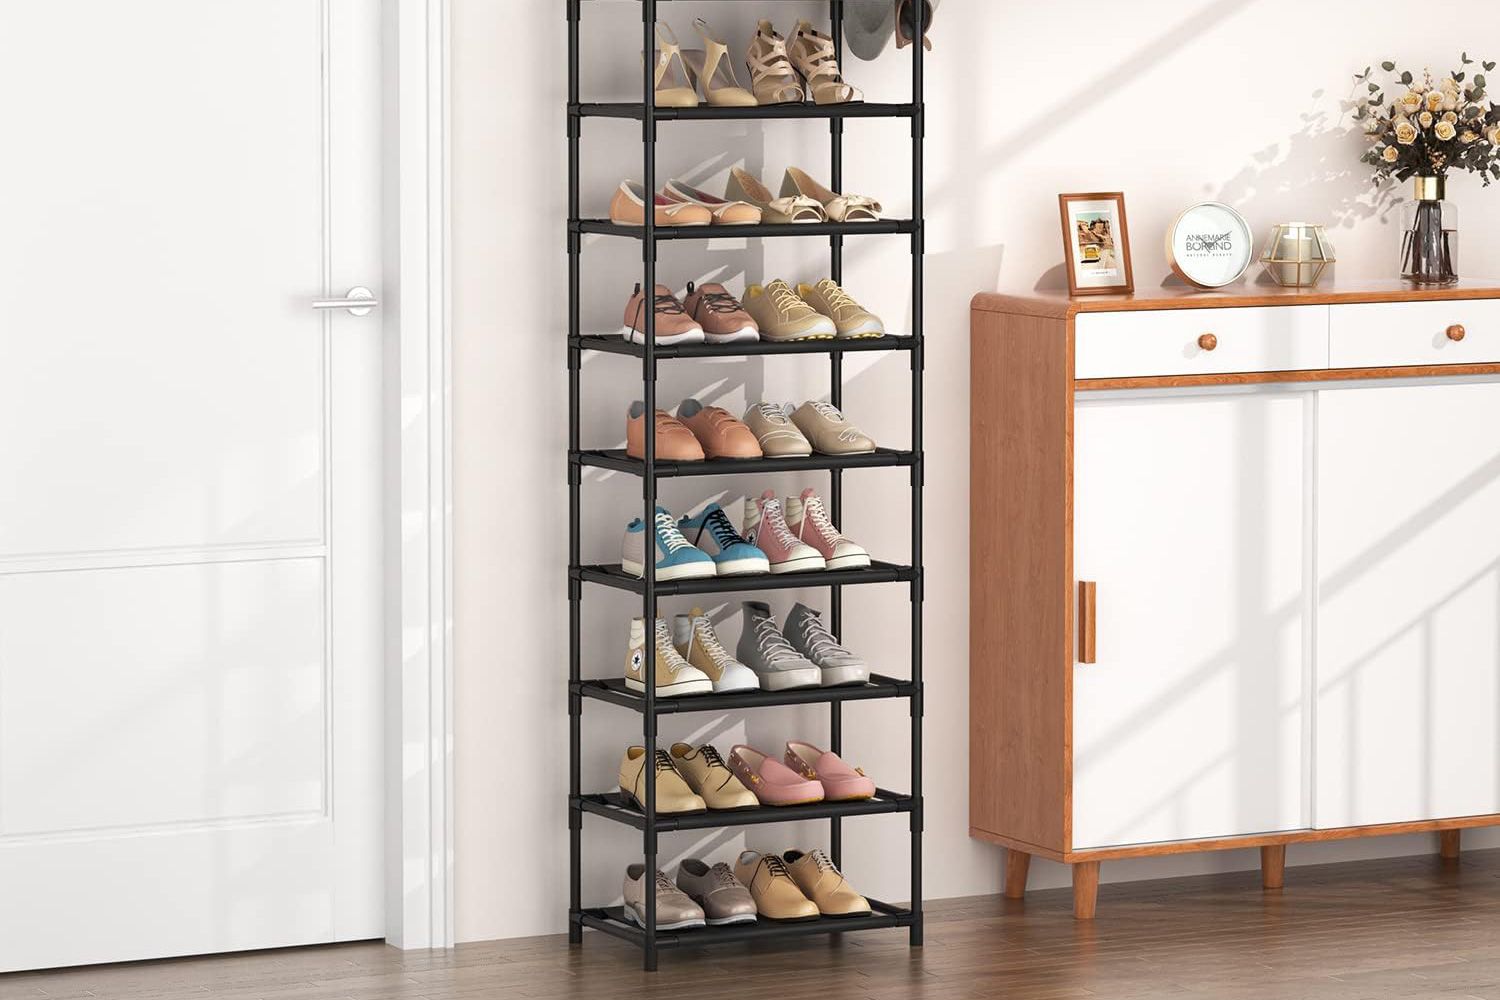  LANTEFUL 10 Tiers Tall Shoe Rack 20-25 Pairs Boots Organizer